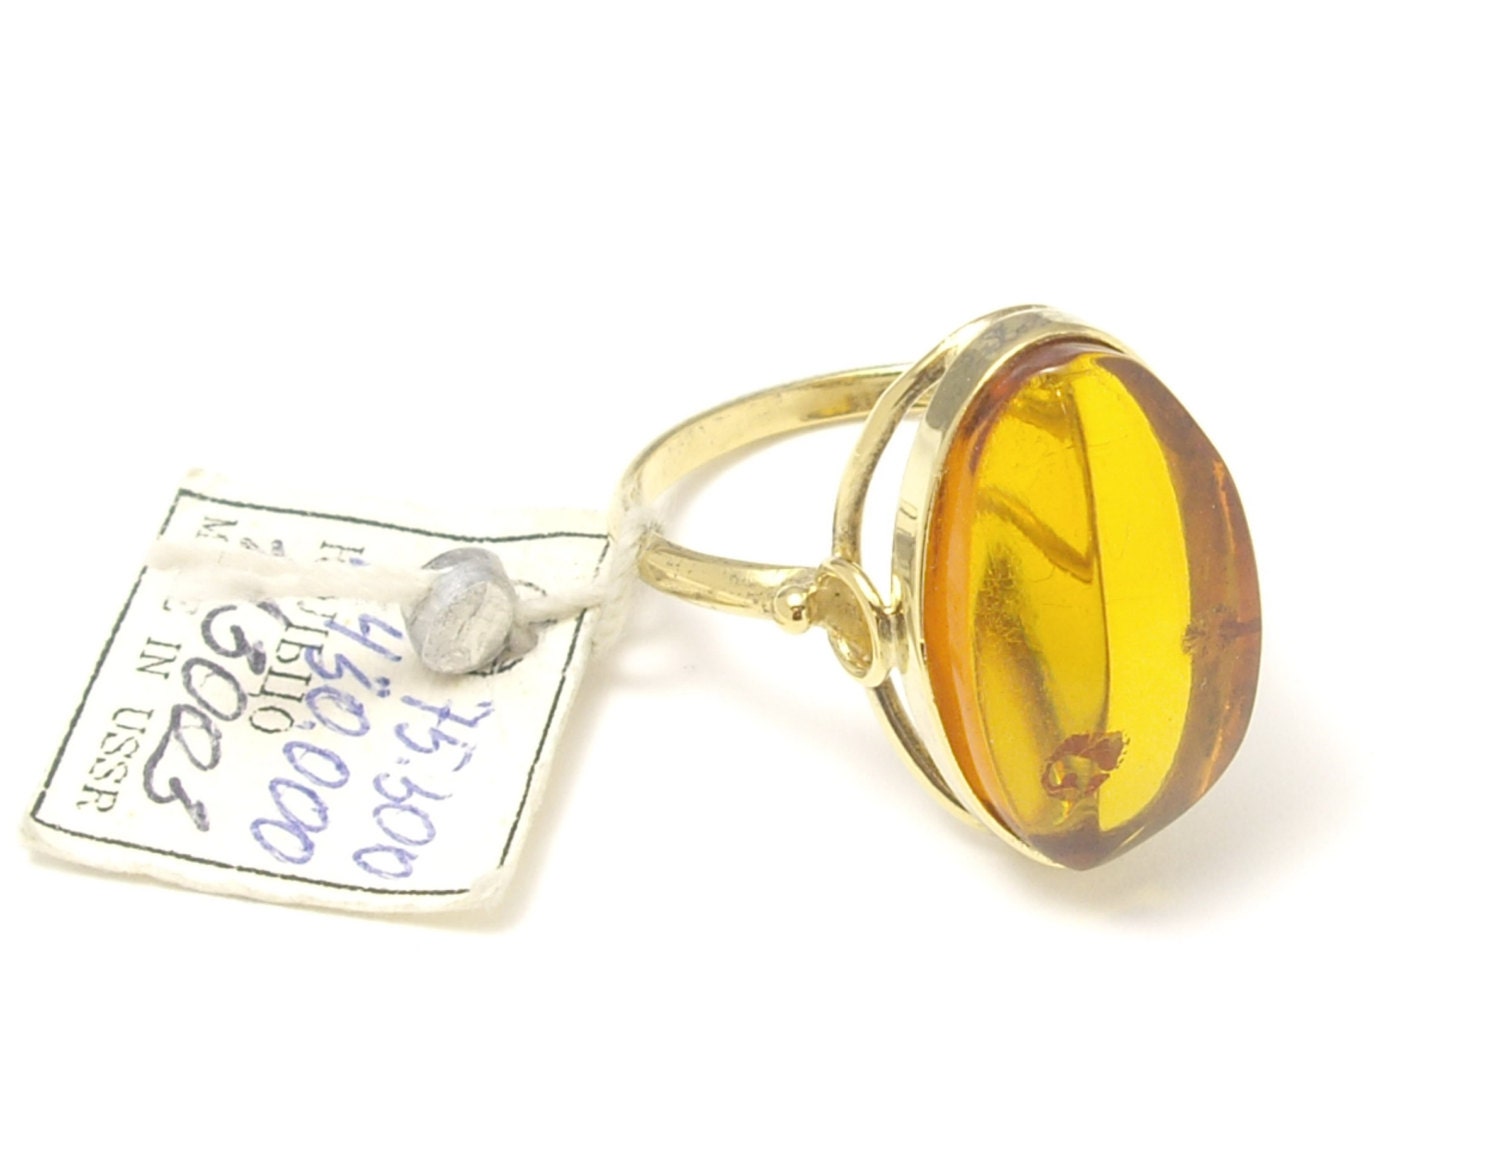 Russian Jewelry Including Amber 117